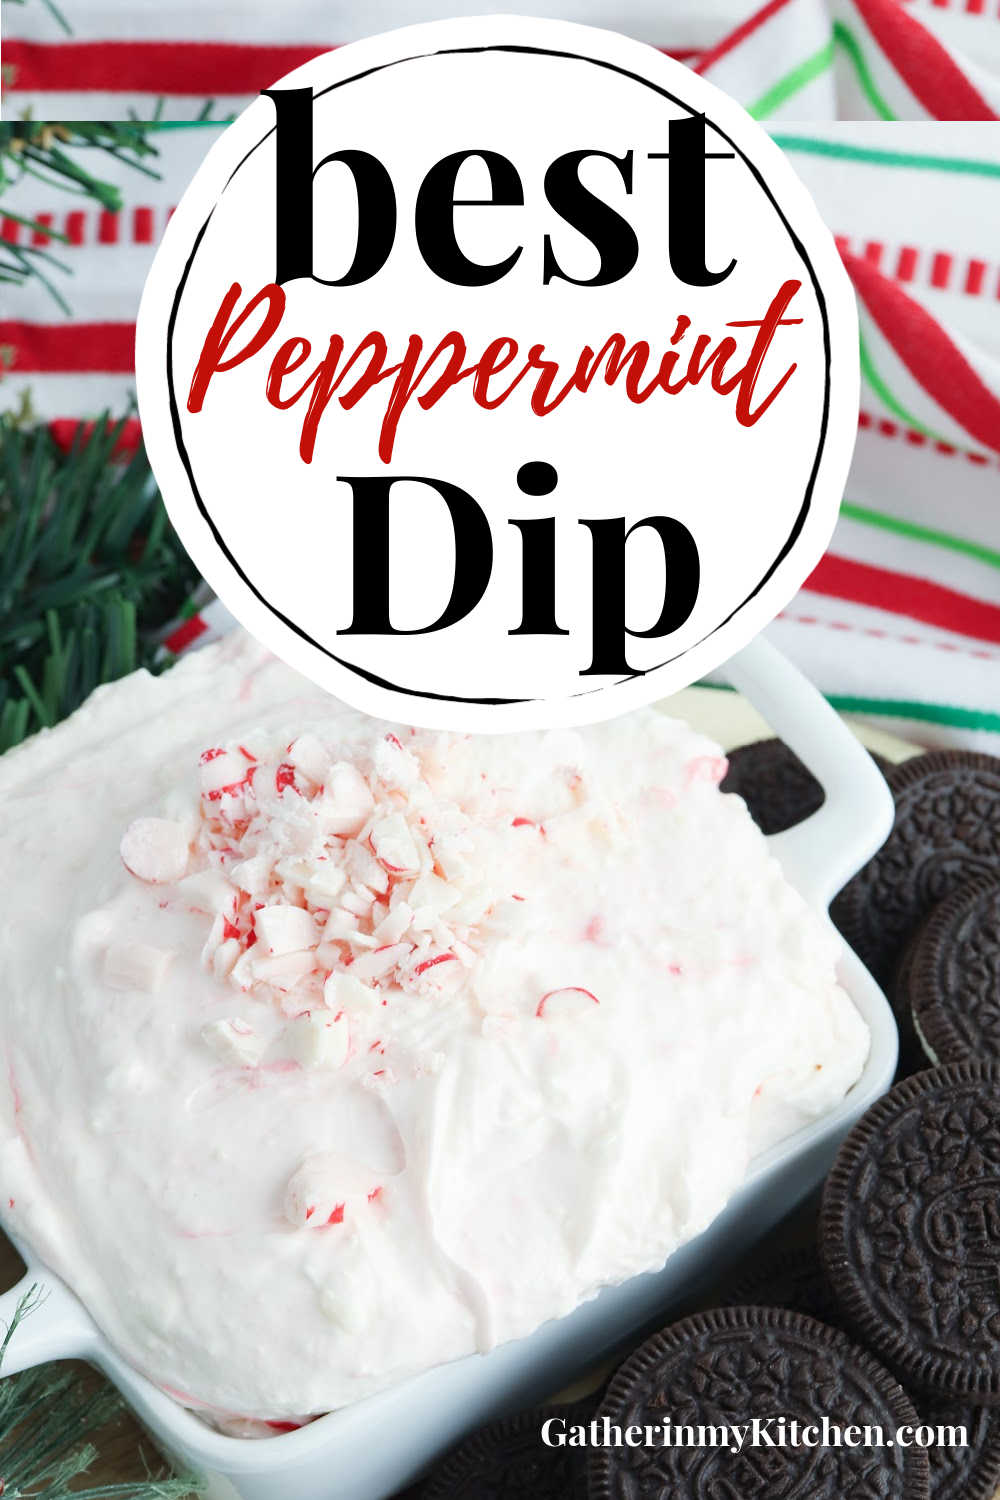 Pin image: top has a circle with the words "Best peppermint dip" in it and a pic of peppermint dip underneath.